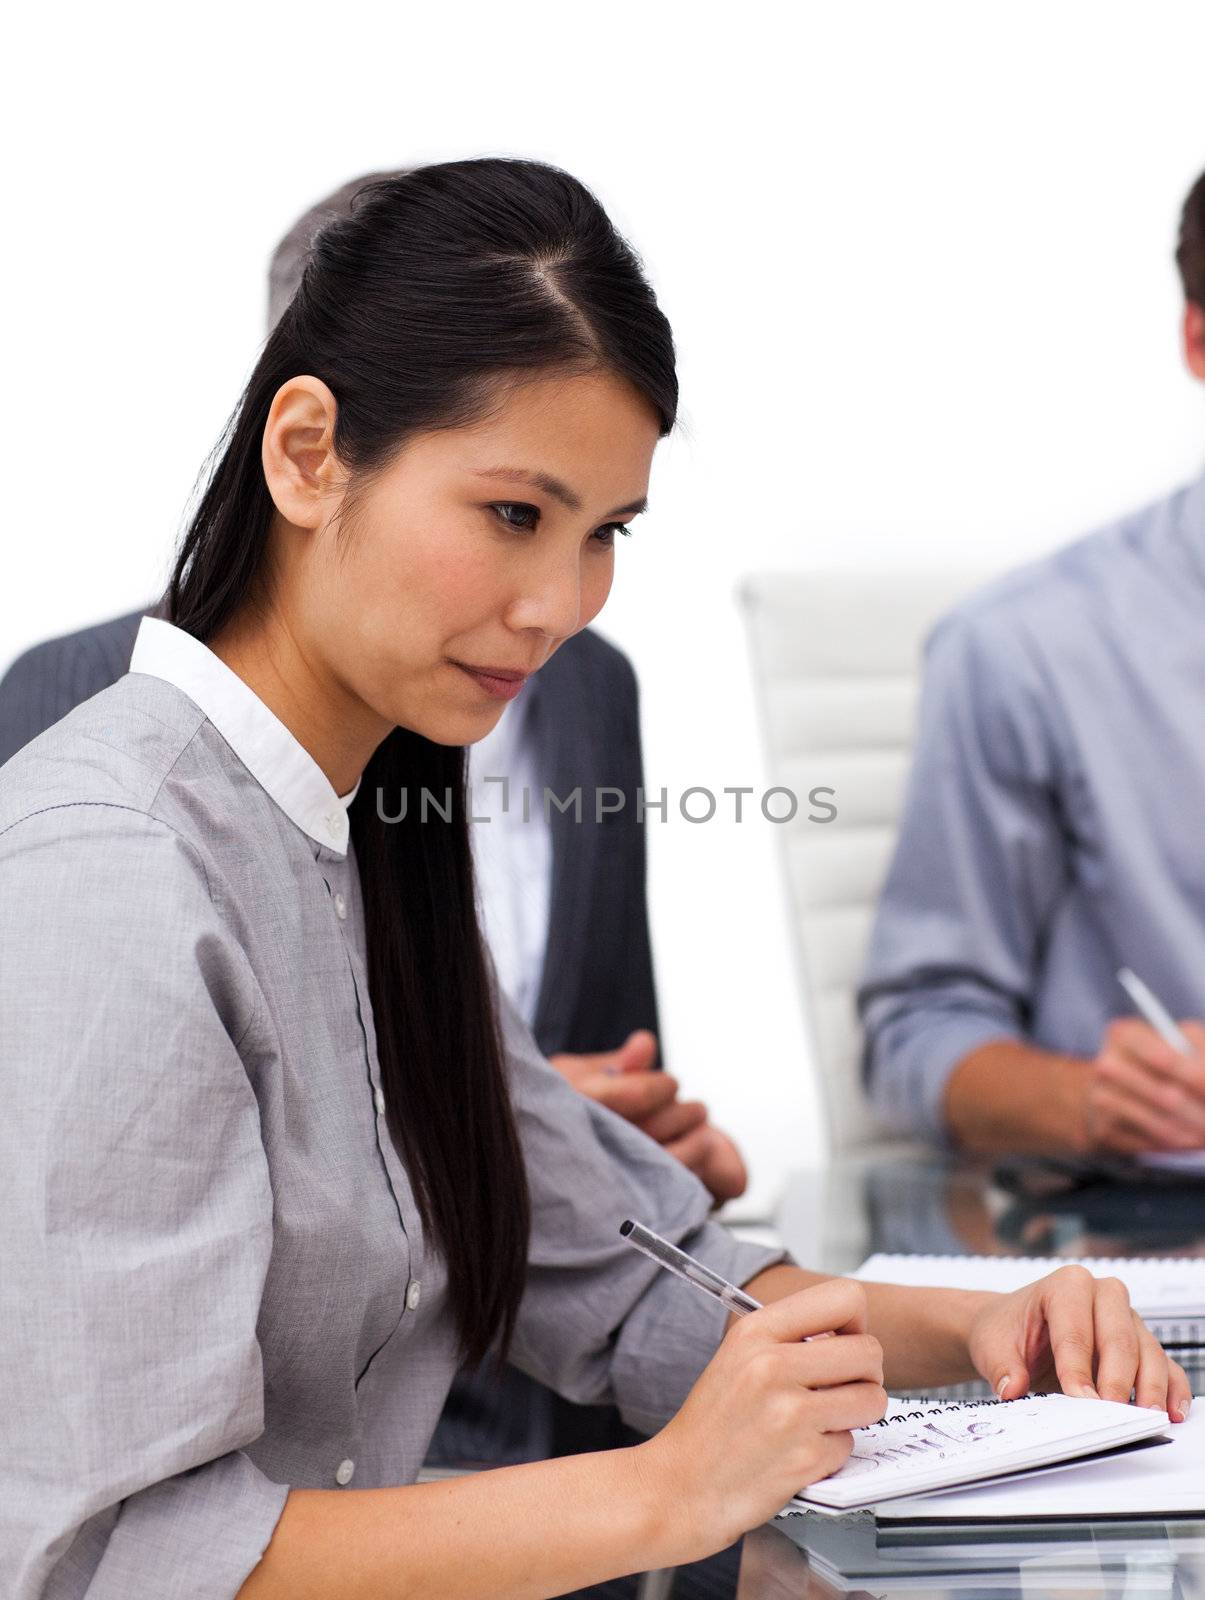 Concentrated female executive studying a document in a meeting